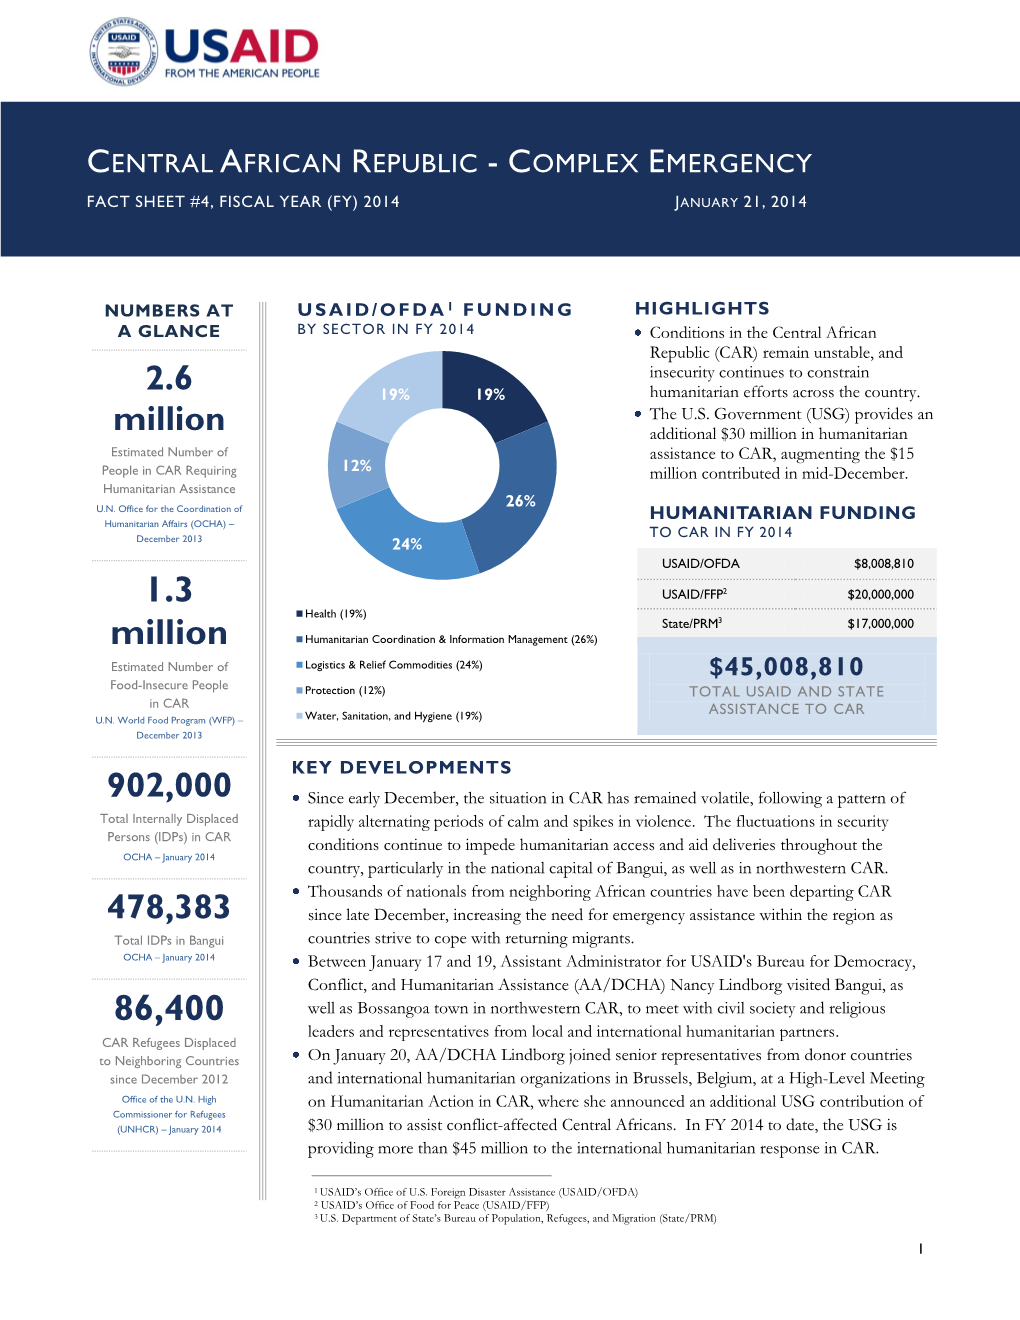 Central African Republic Complex Emergency Fact Sheet #4 01-21